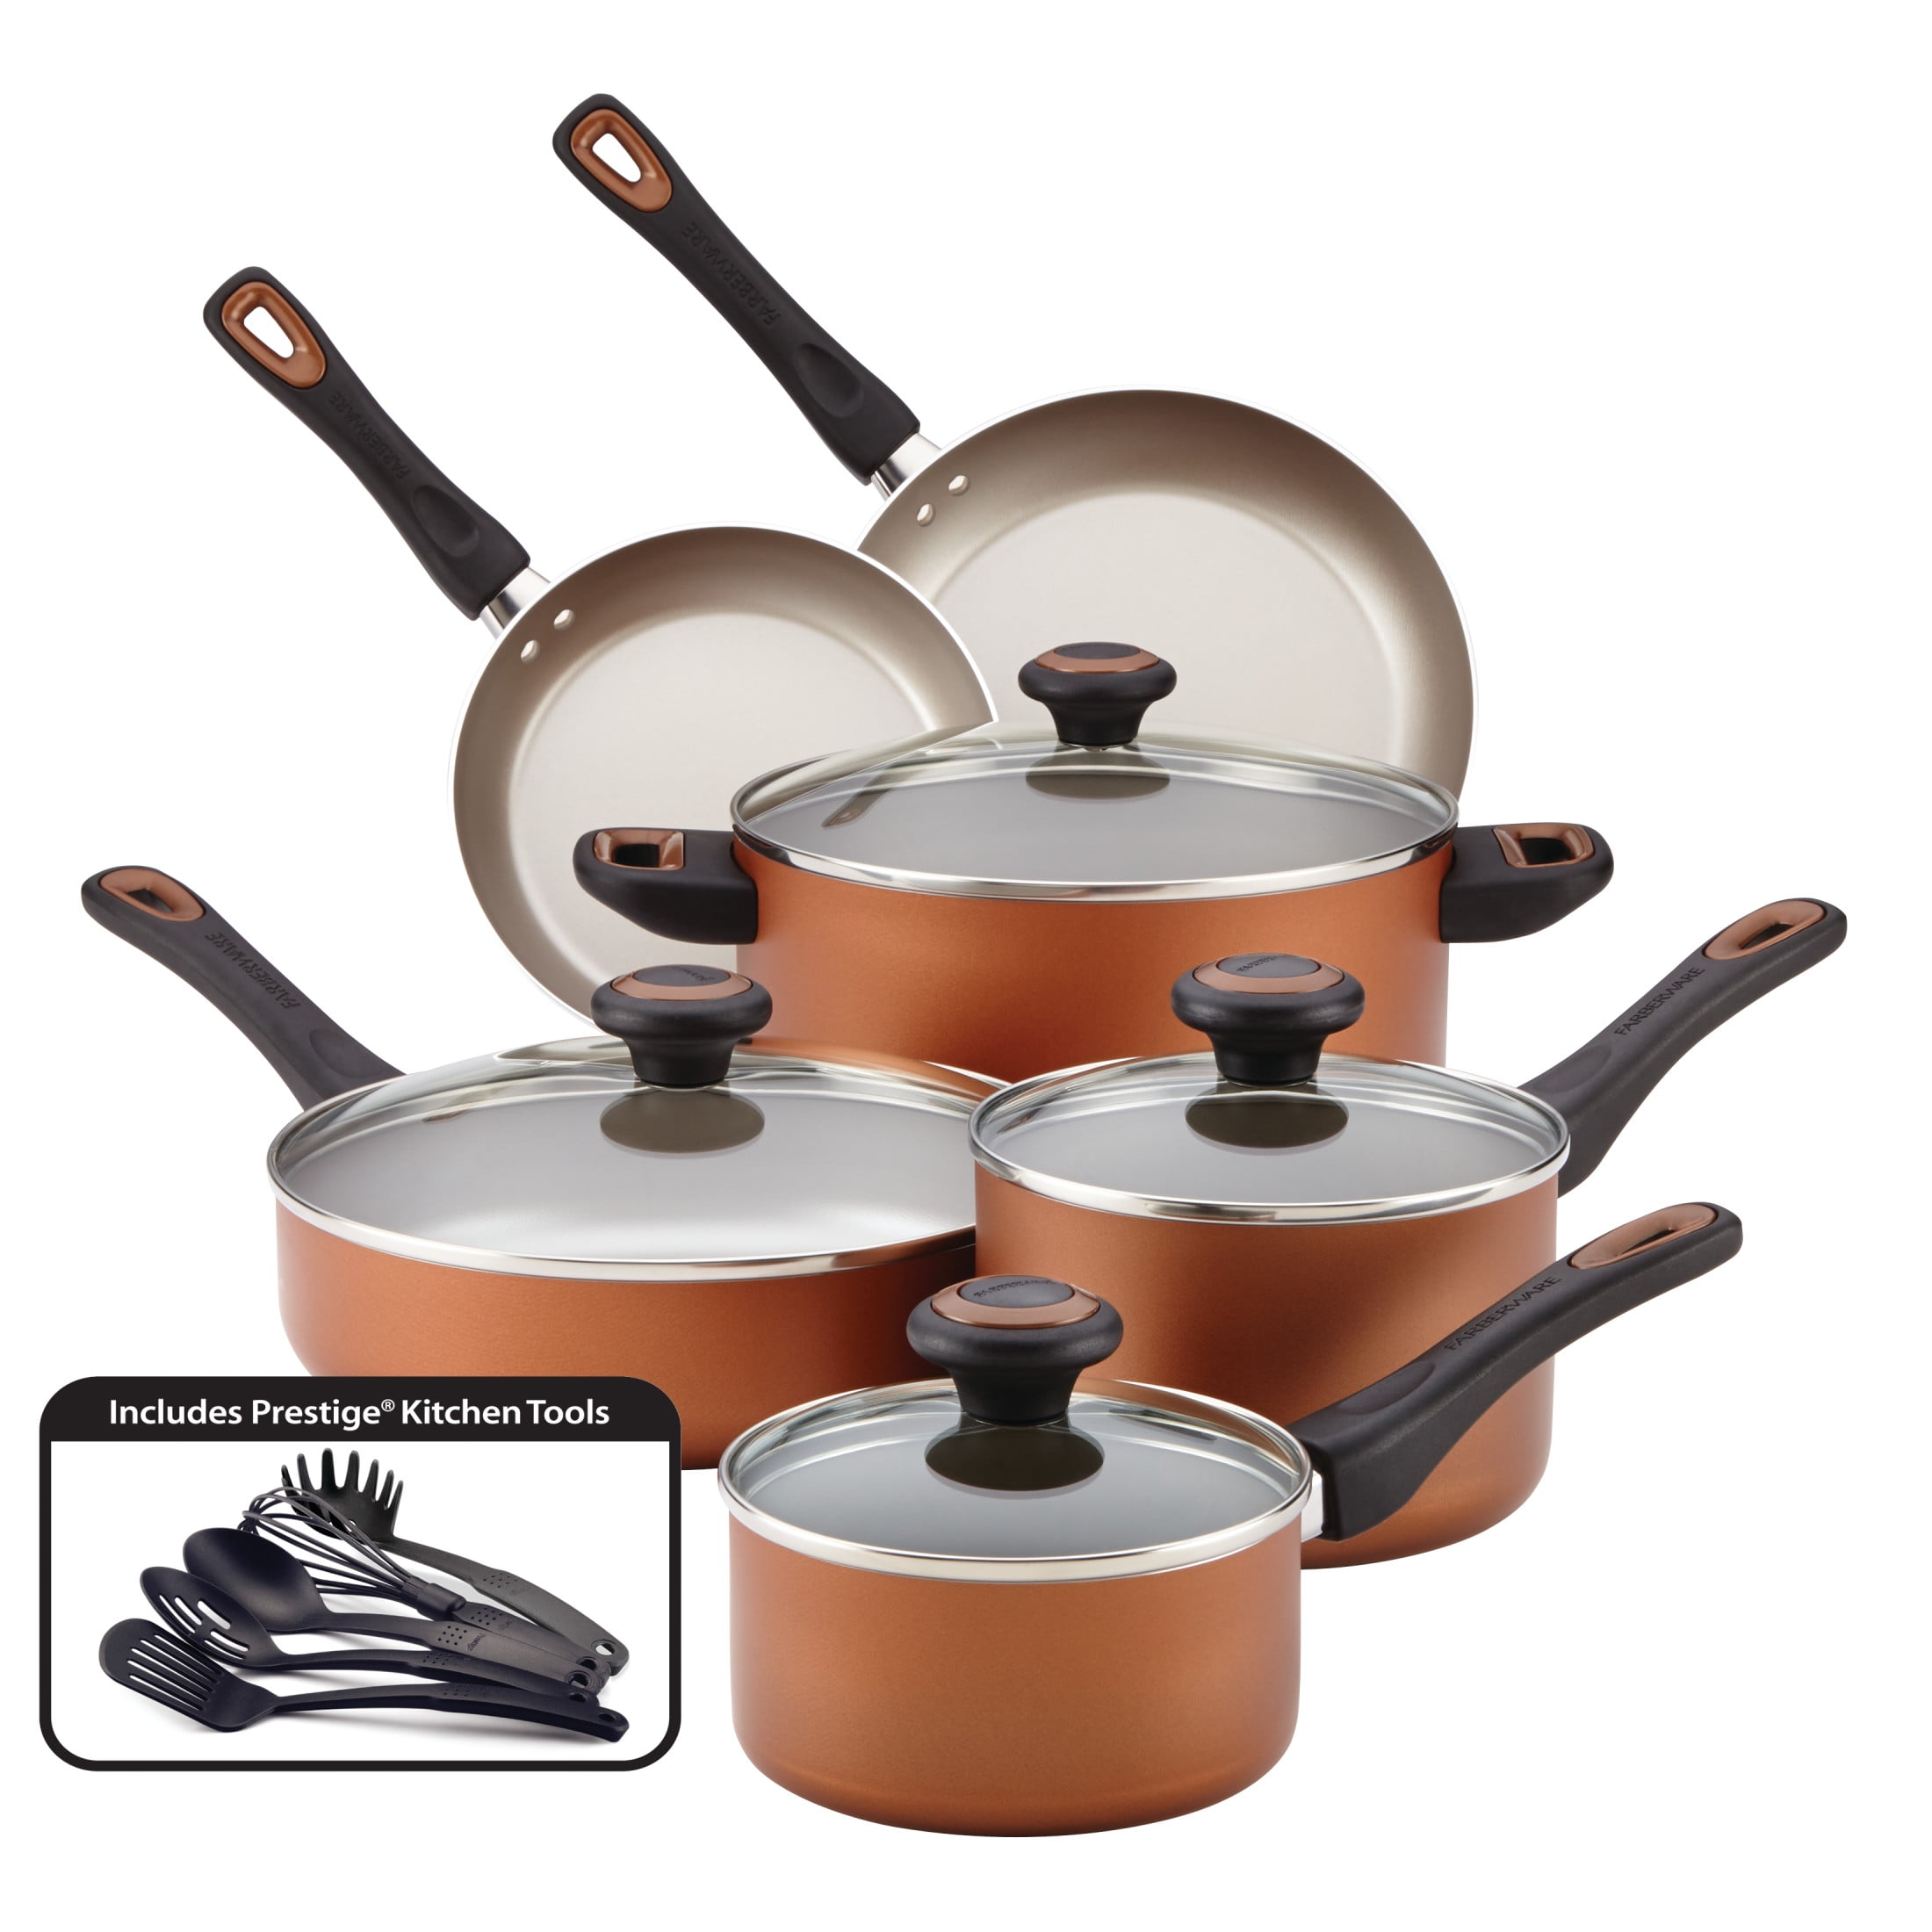 Farberware 15-Piece Dishwasher Safe High Performance Nonstick Pots and Pans/ Cookware Set, Copper 